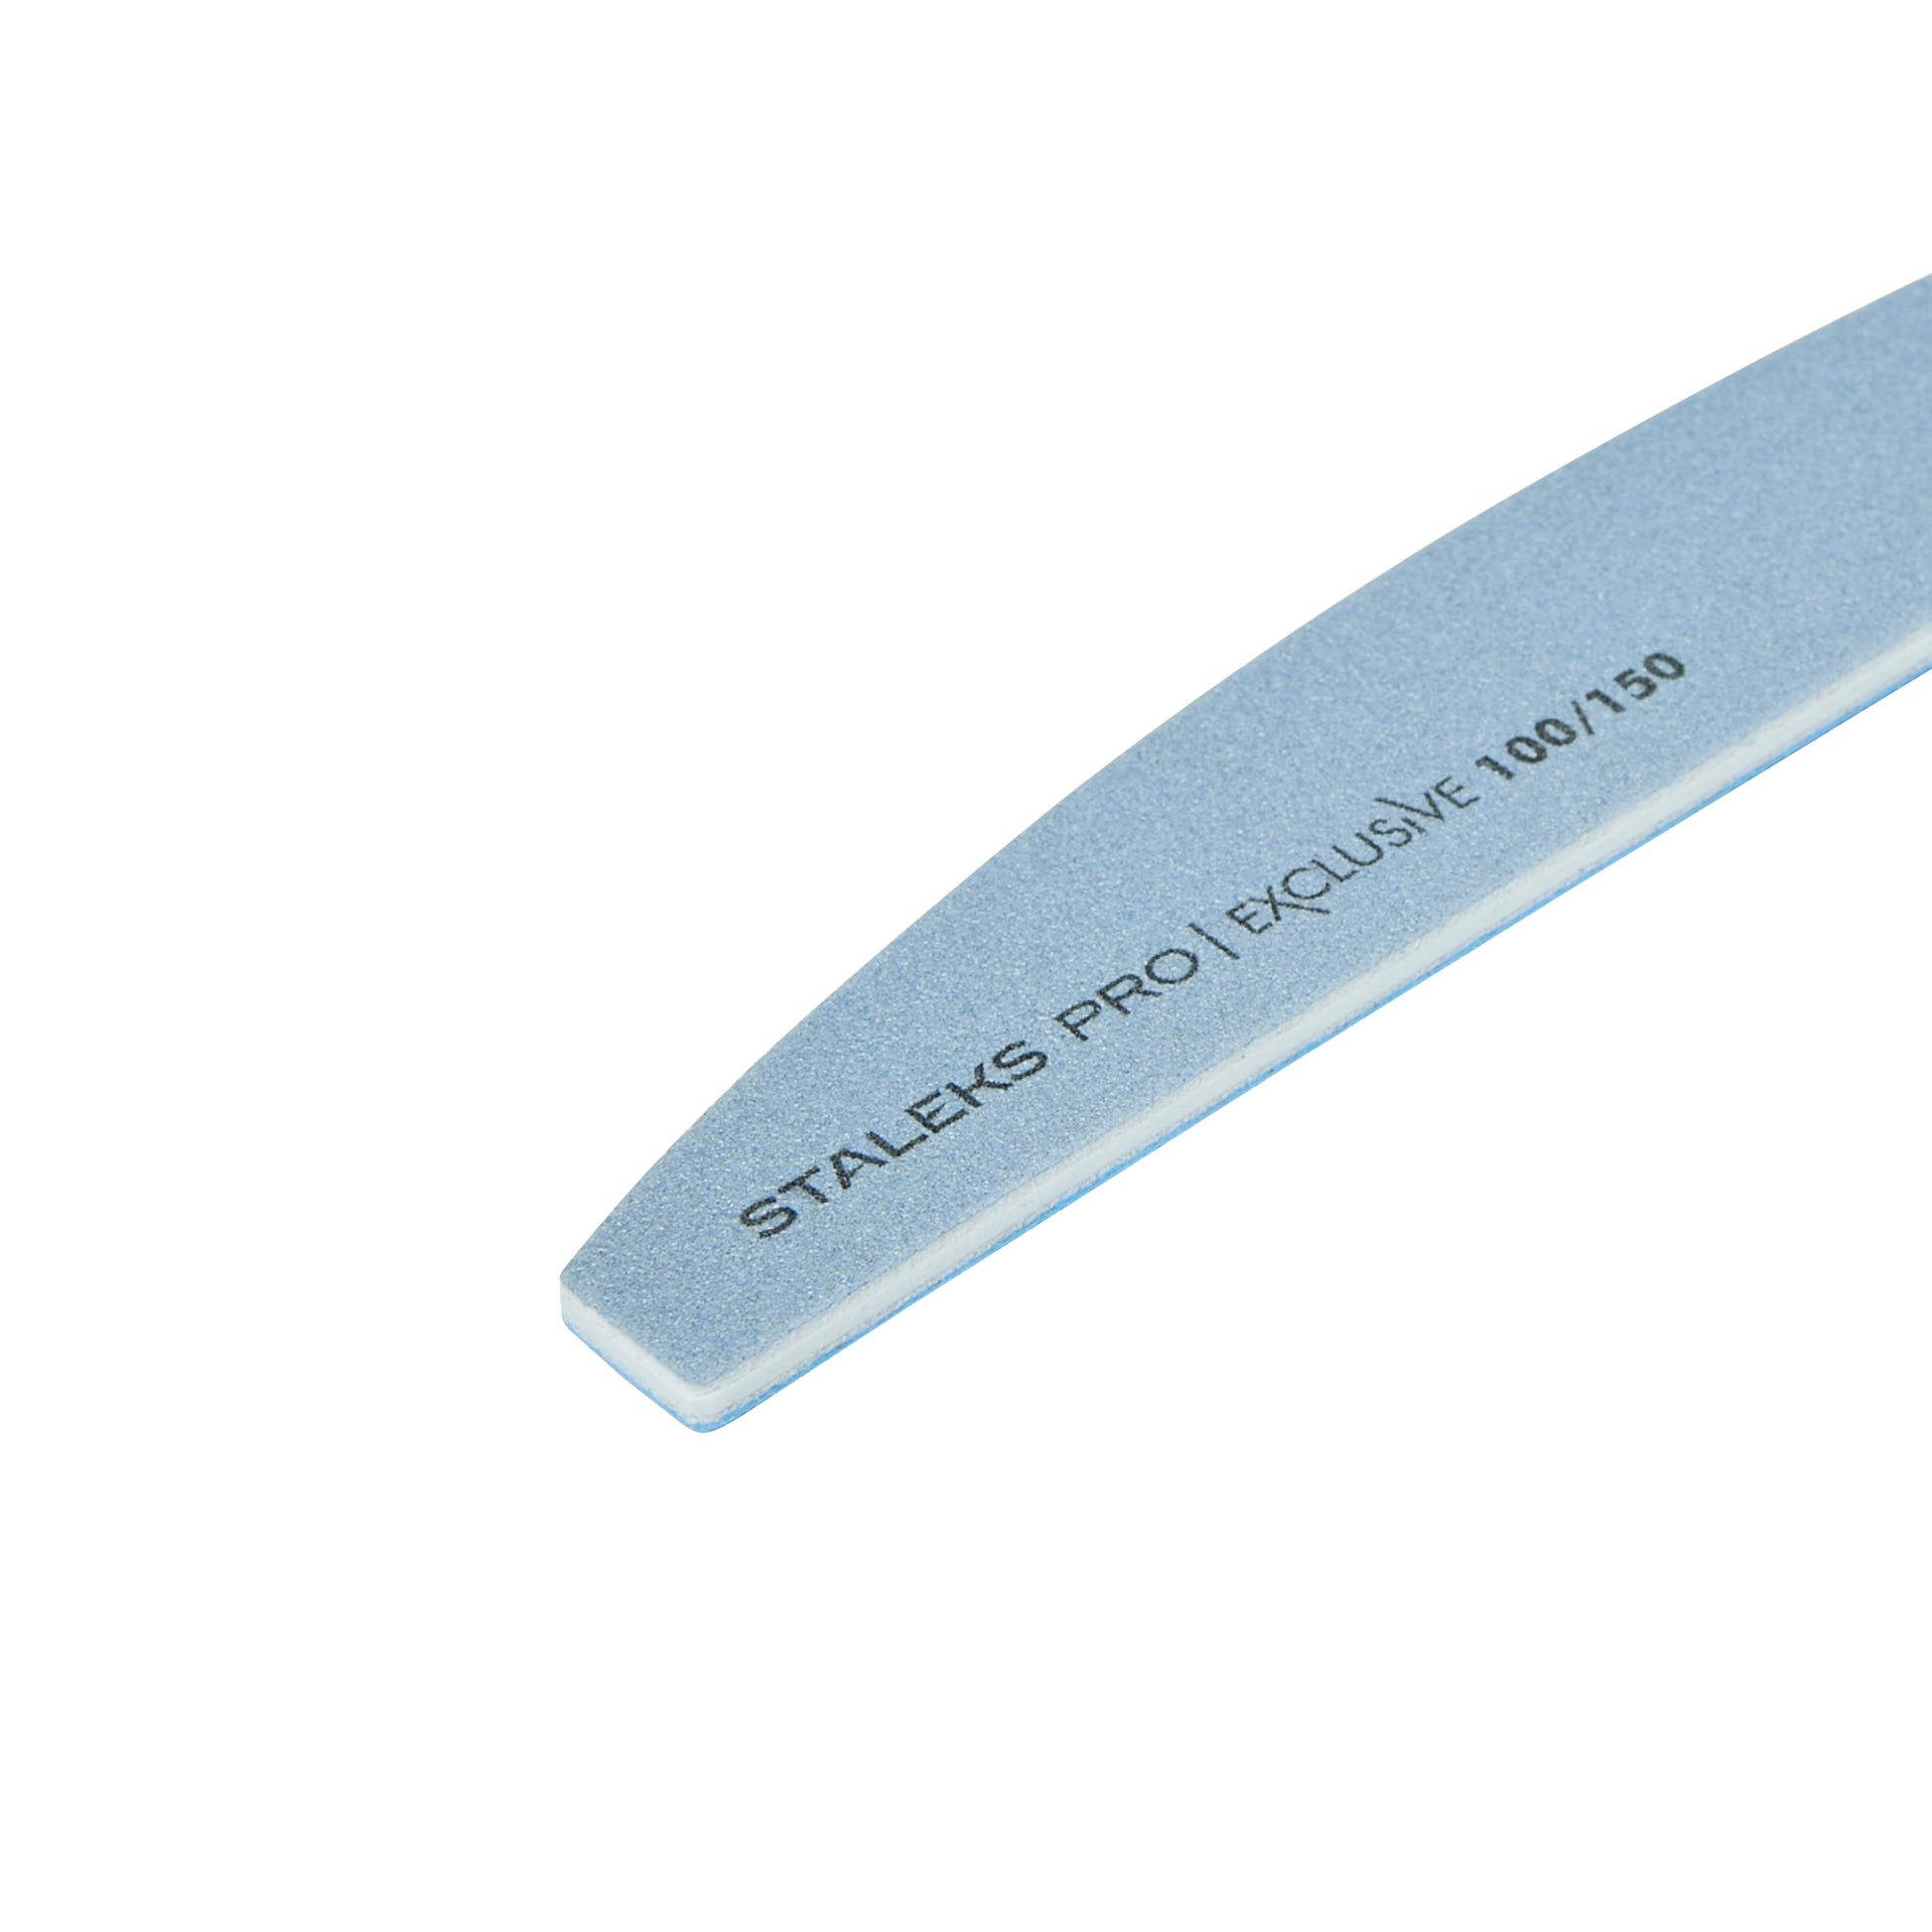 STALEKS-100/150grit Mineral crescent nail file EXCLUSIVE-1